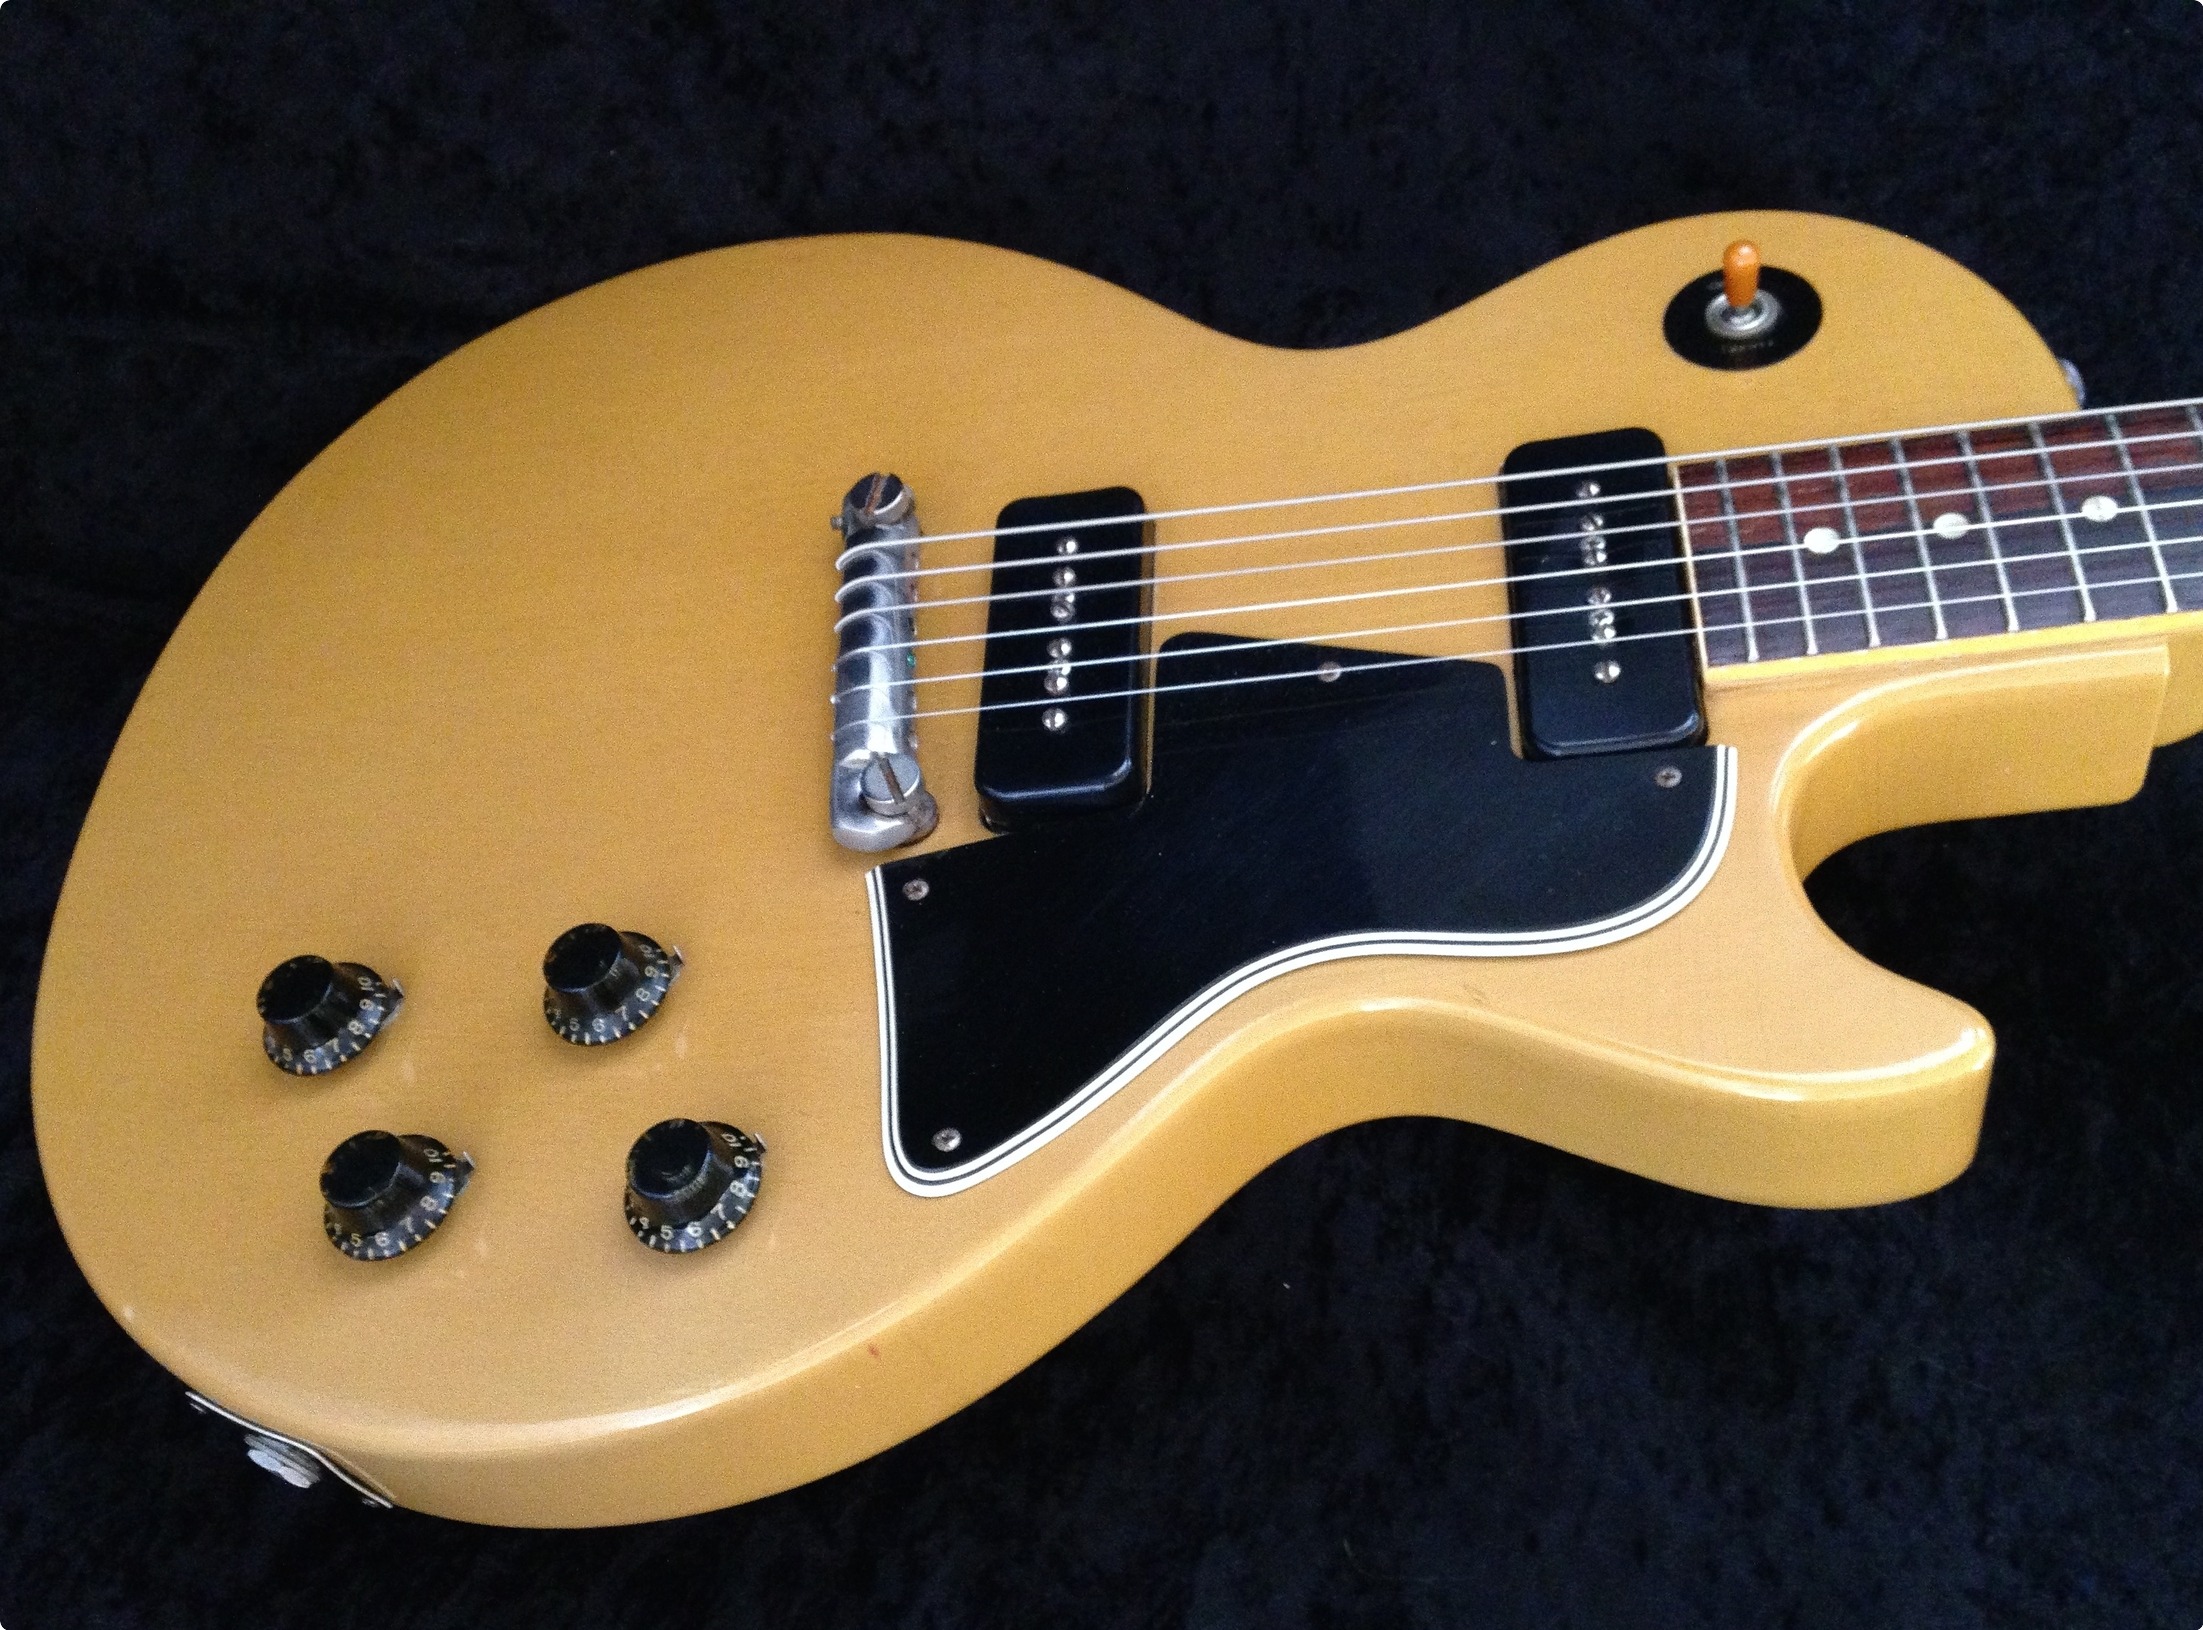 Gibson Les Paul Special 1956 Tv Yellow Guitar For Sale Richard Henry